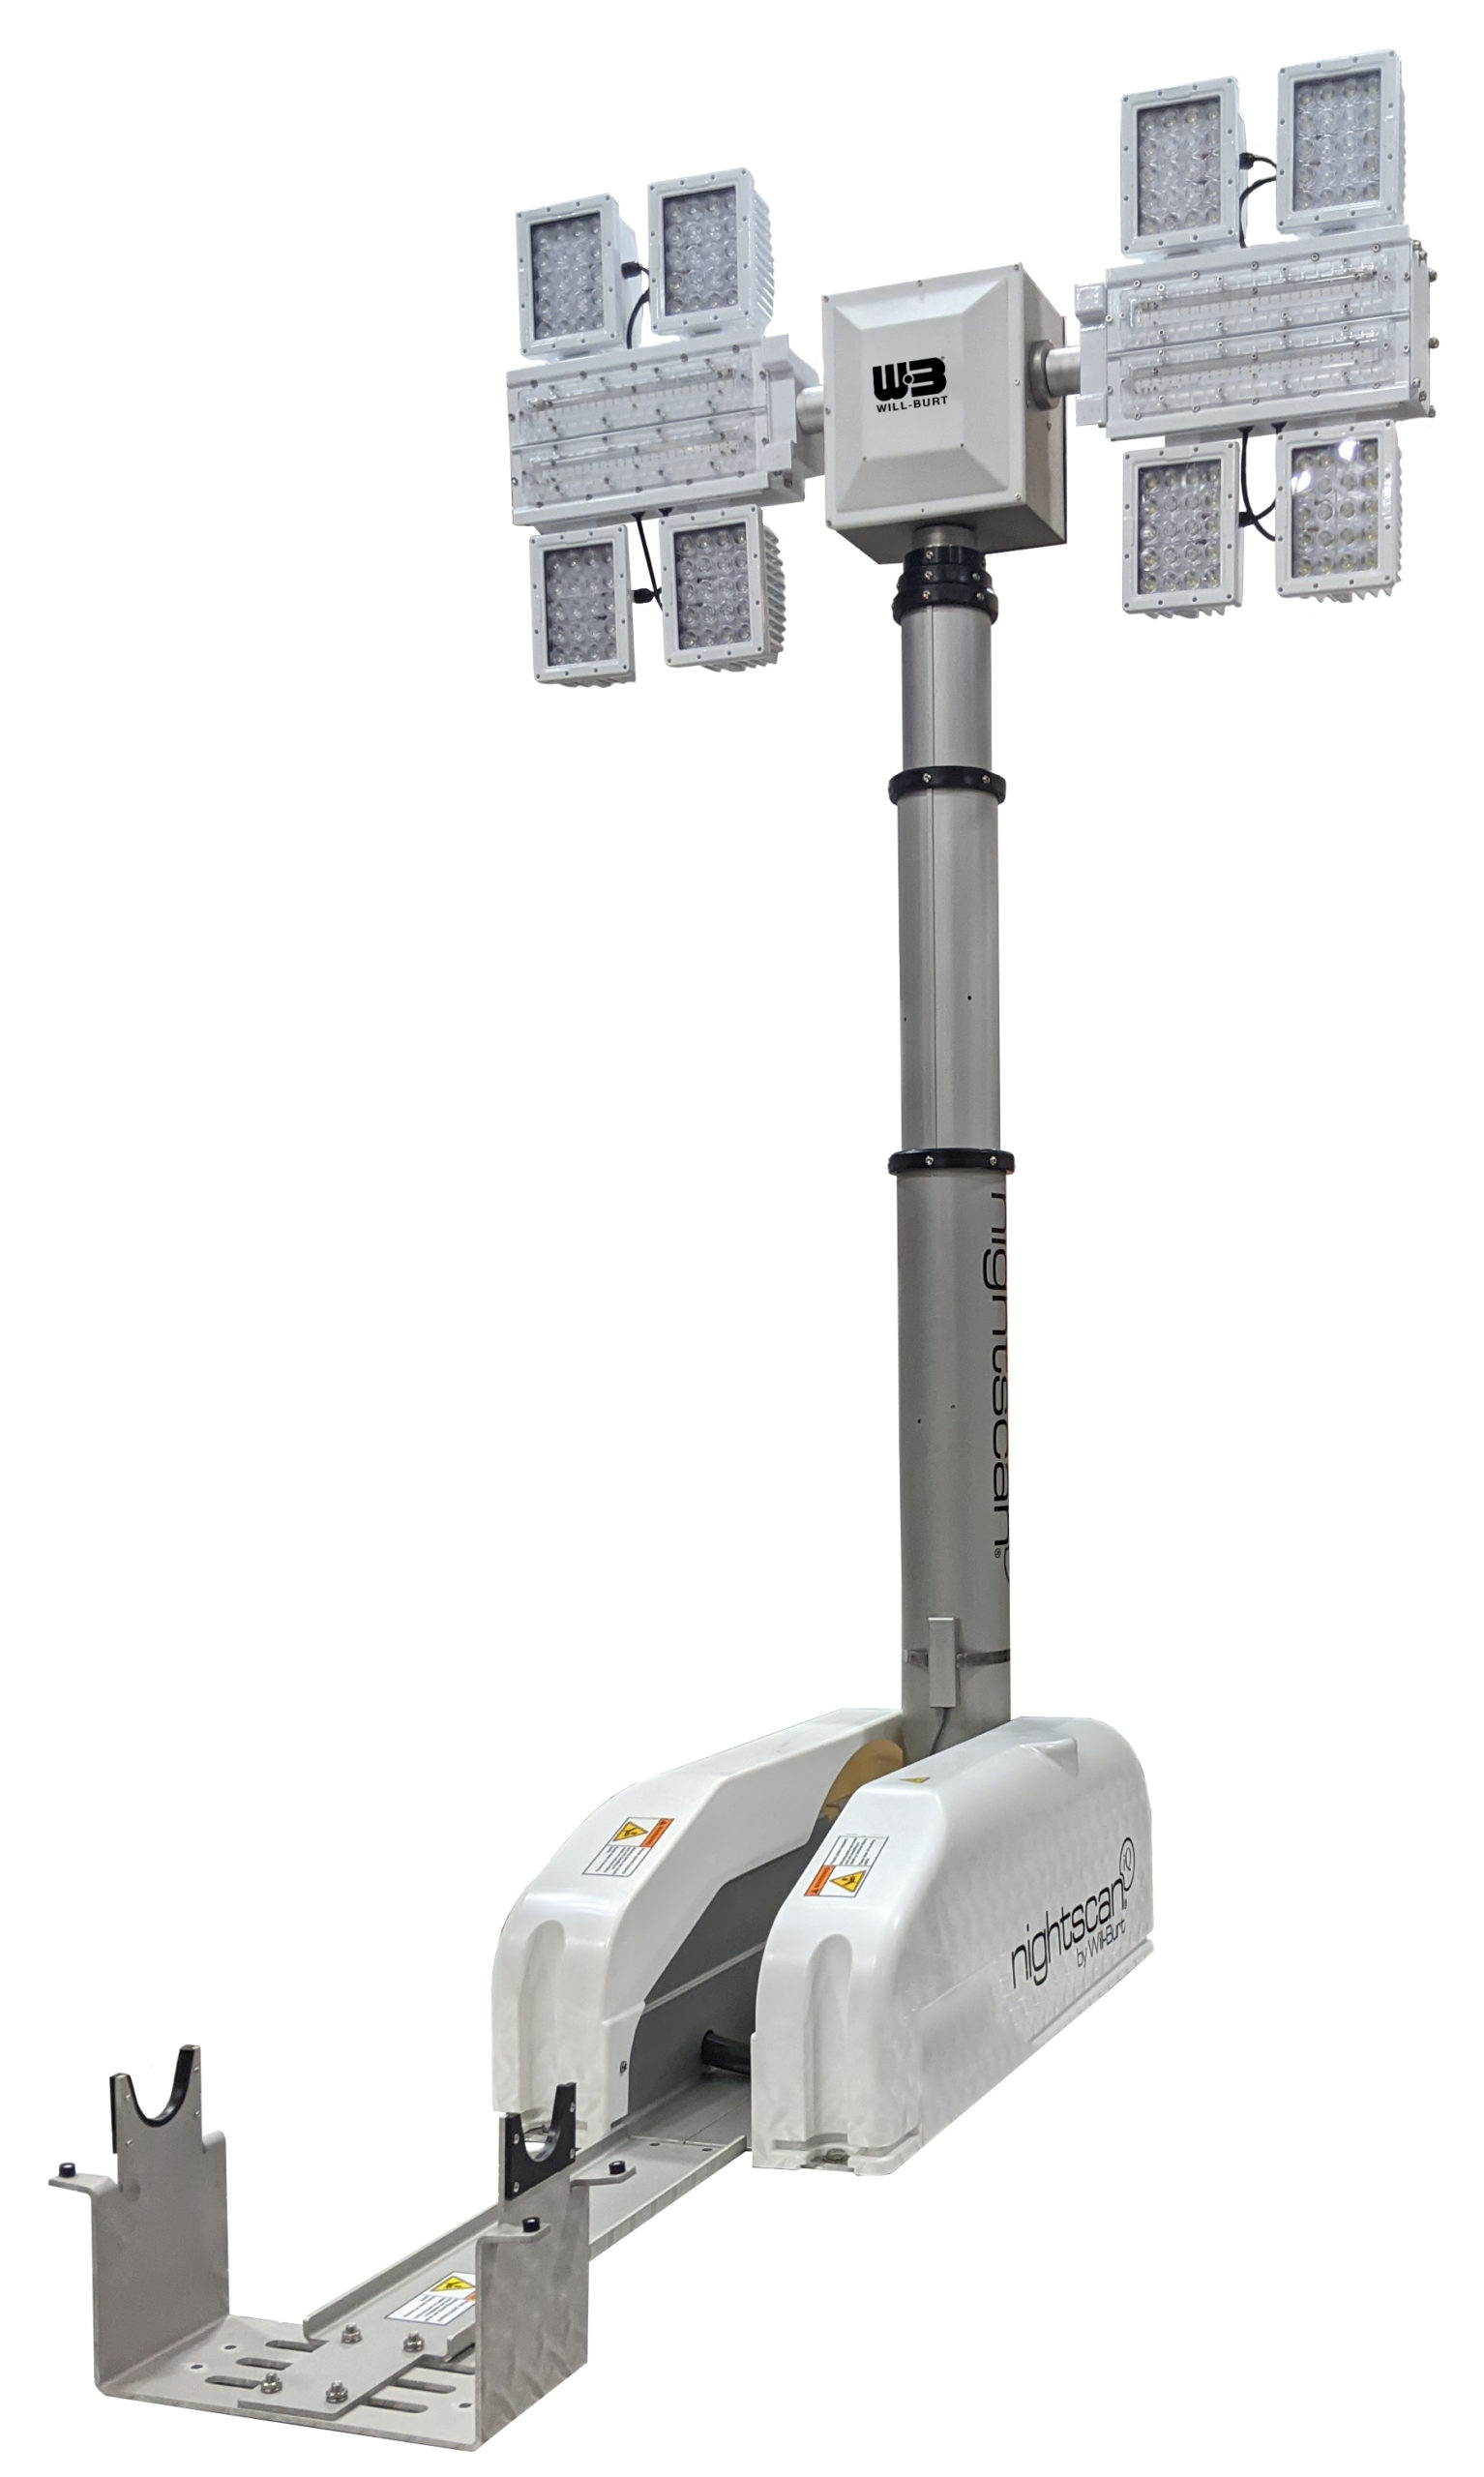 Night Scan IQ intelligent light tower delivers ultimate control over your scene lighting